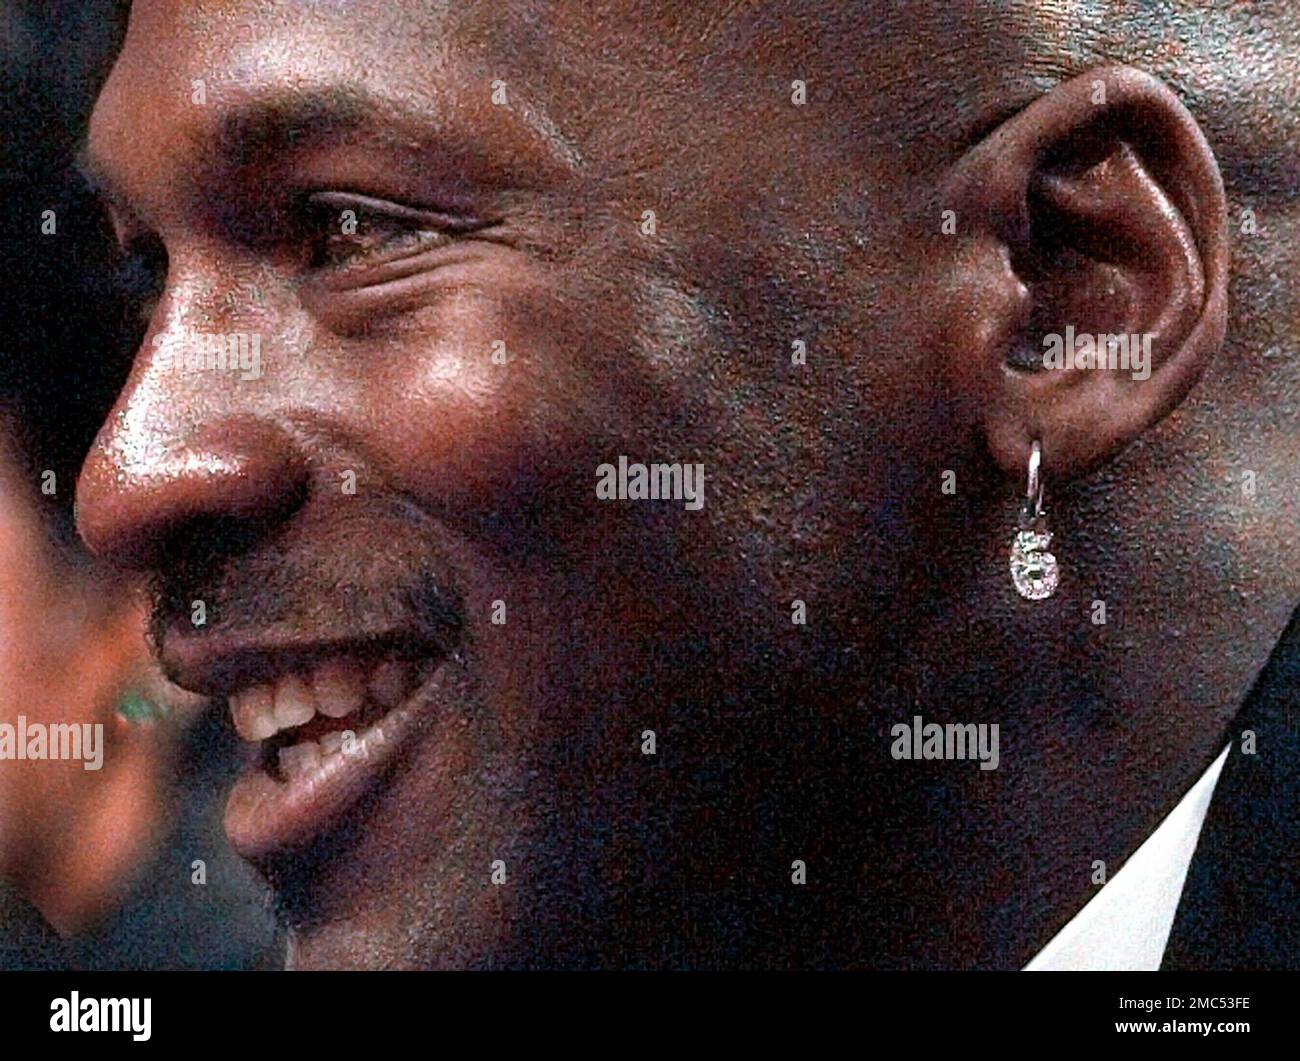 AP Was There: Jordan retires from the NBA after 3 titles